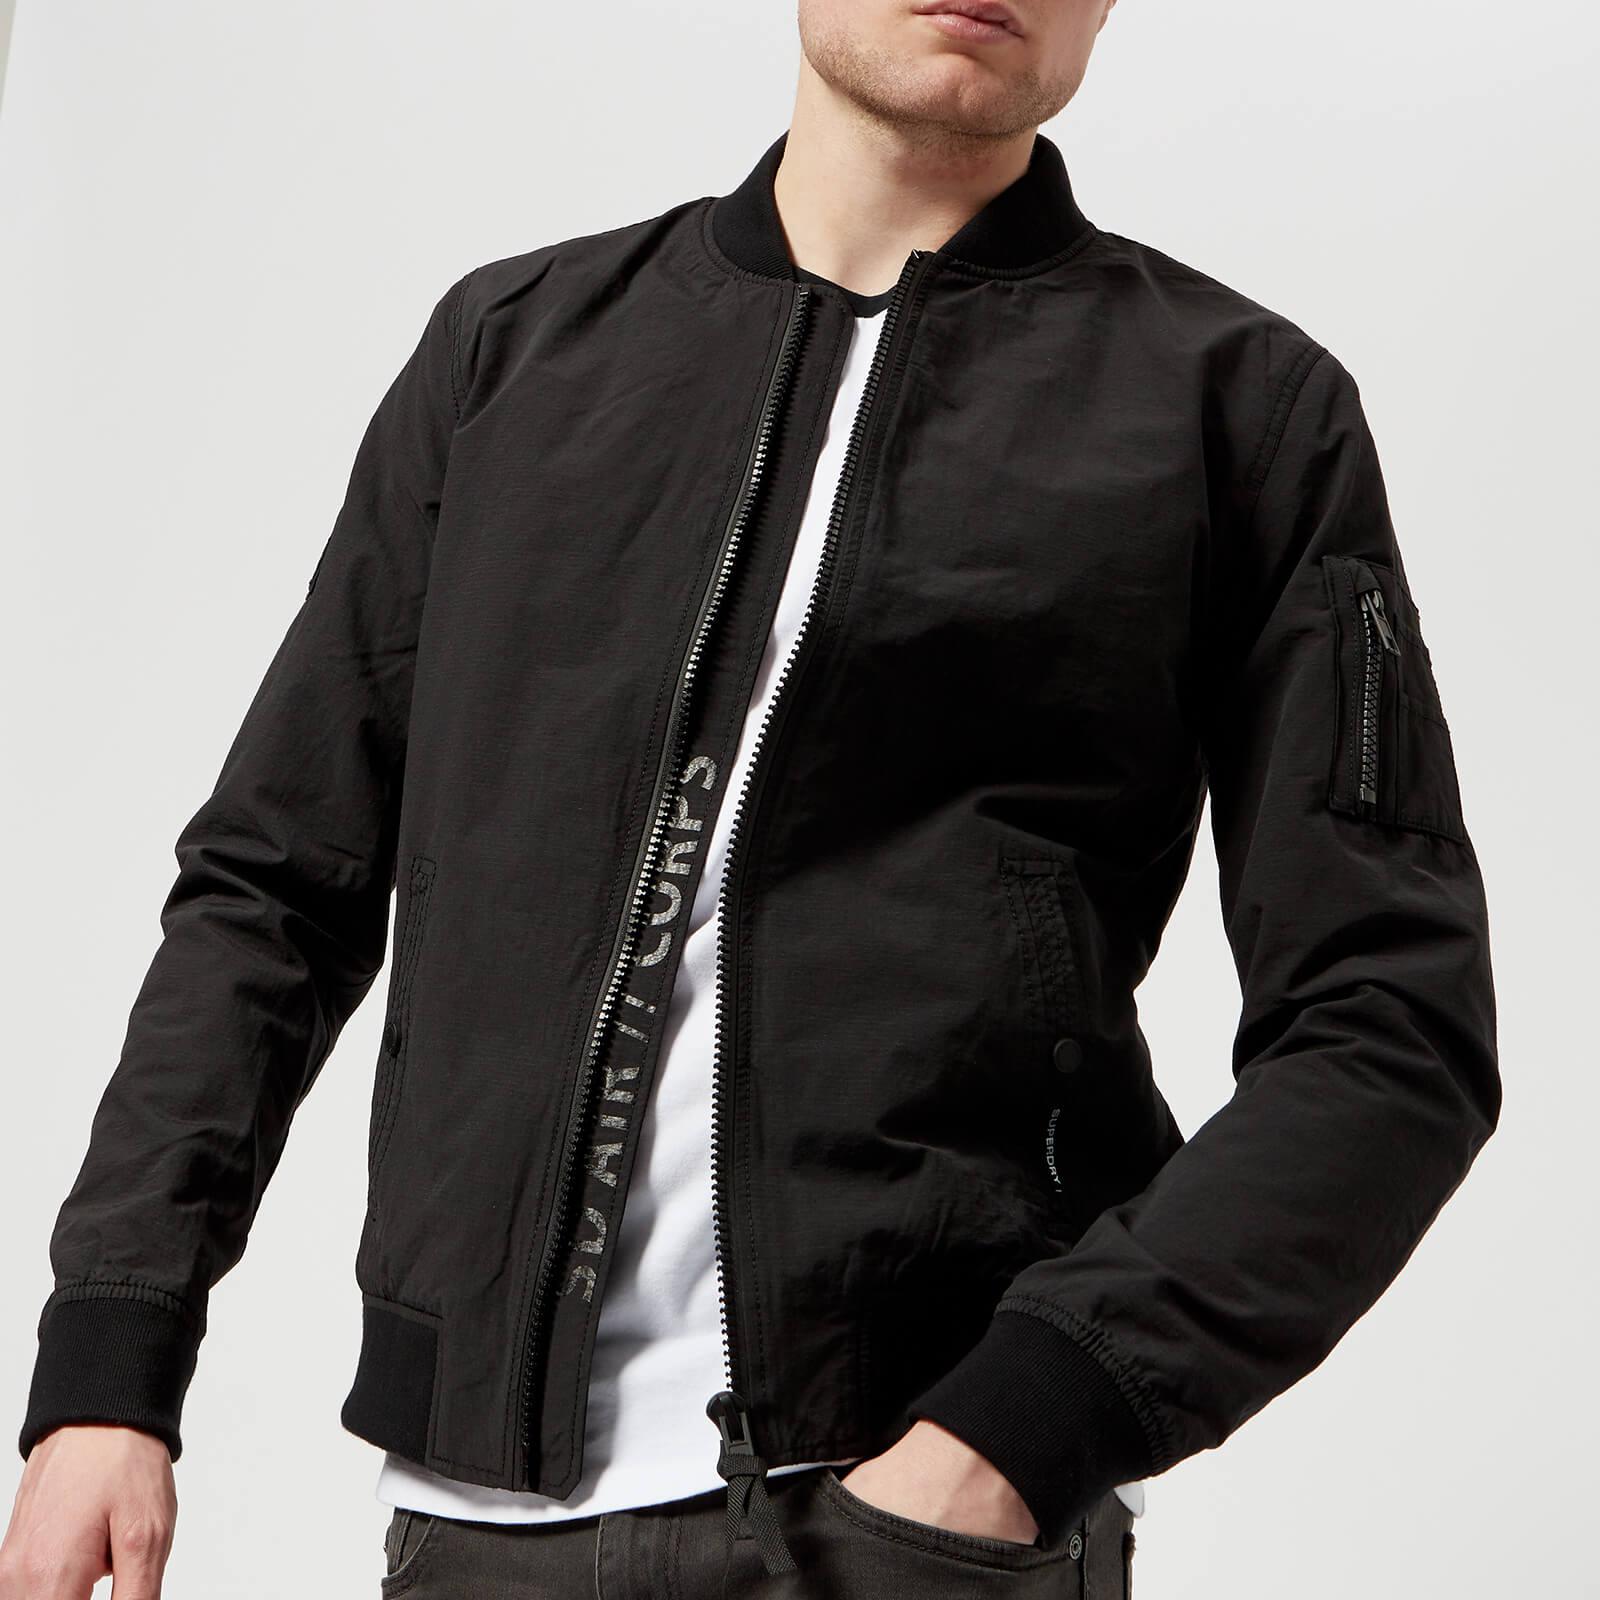 Superdry Rookie Air Corps Bomber Jacket in Black for Men - Lyst